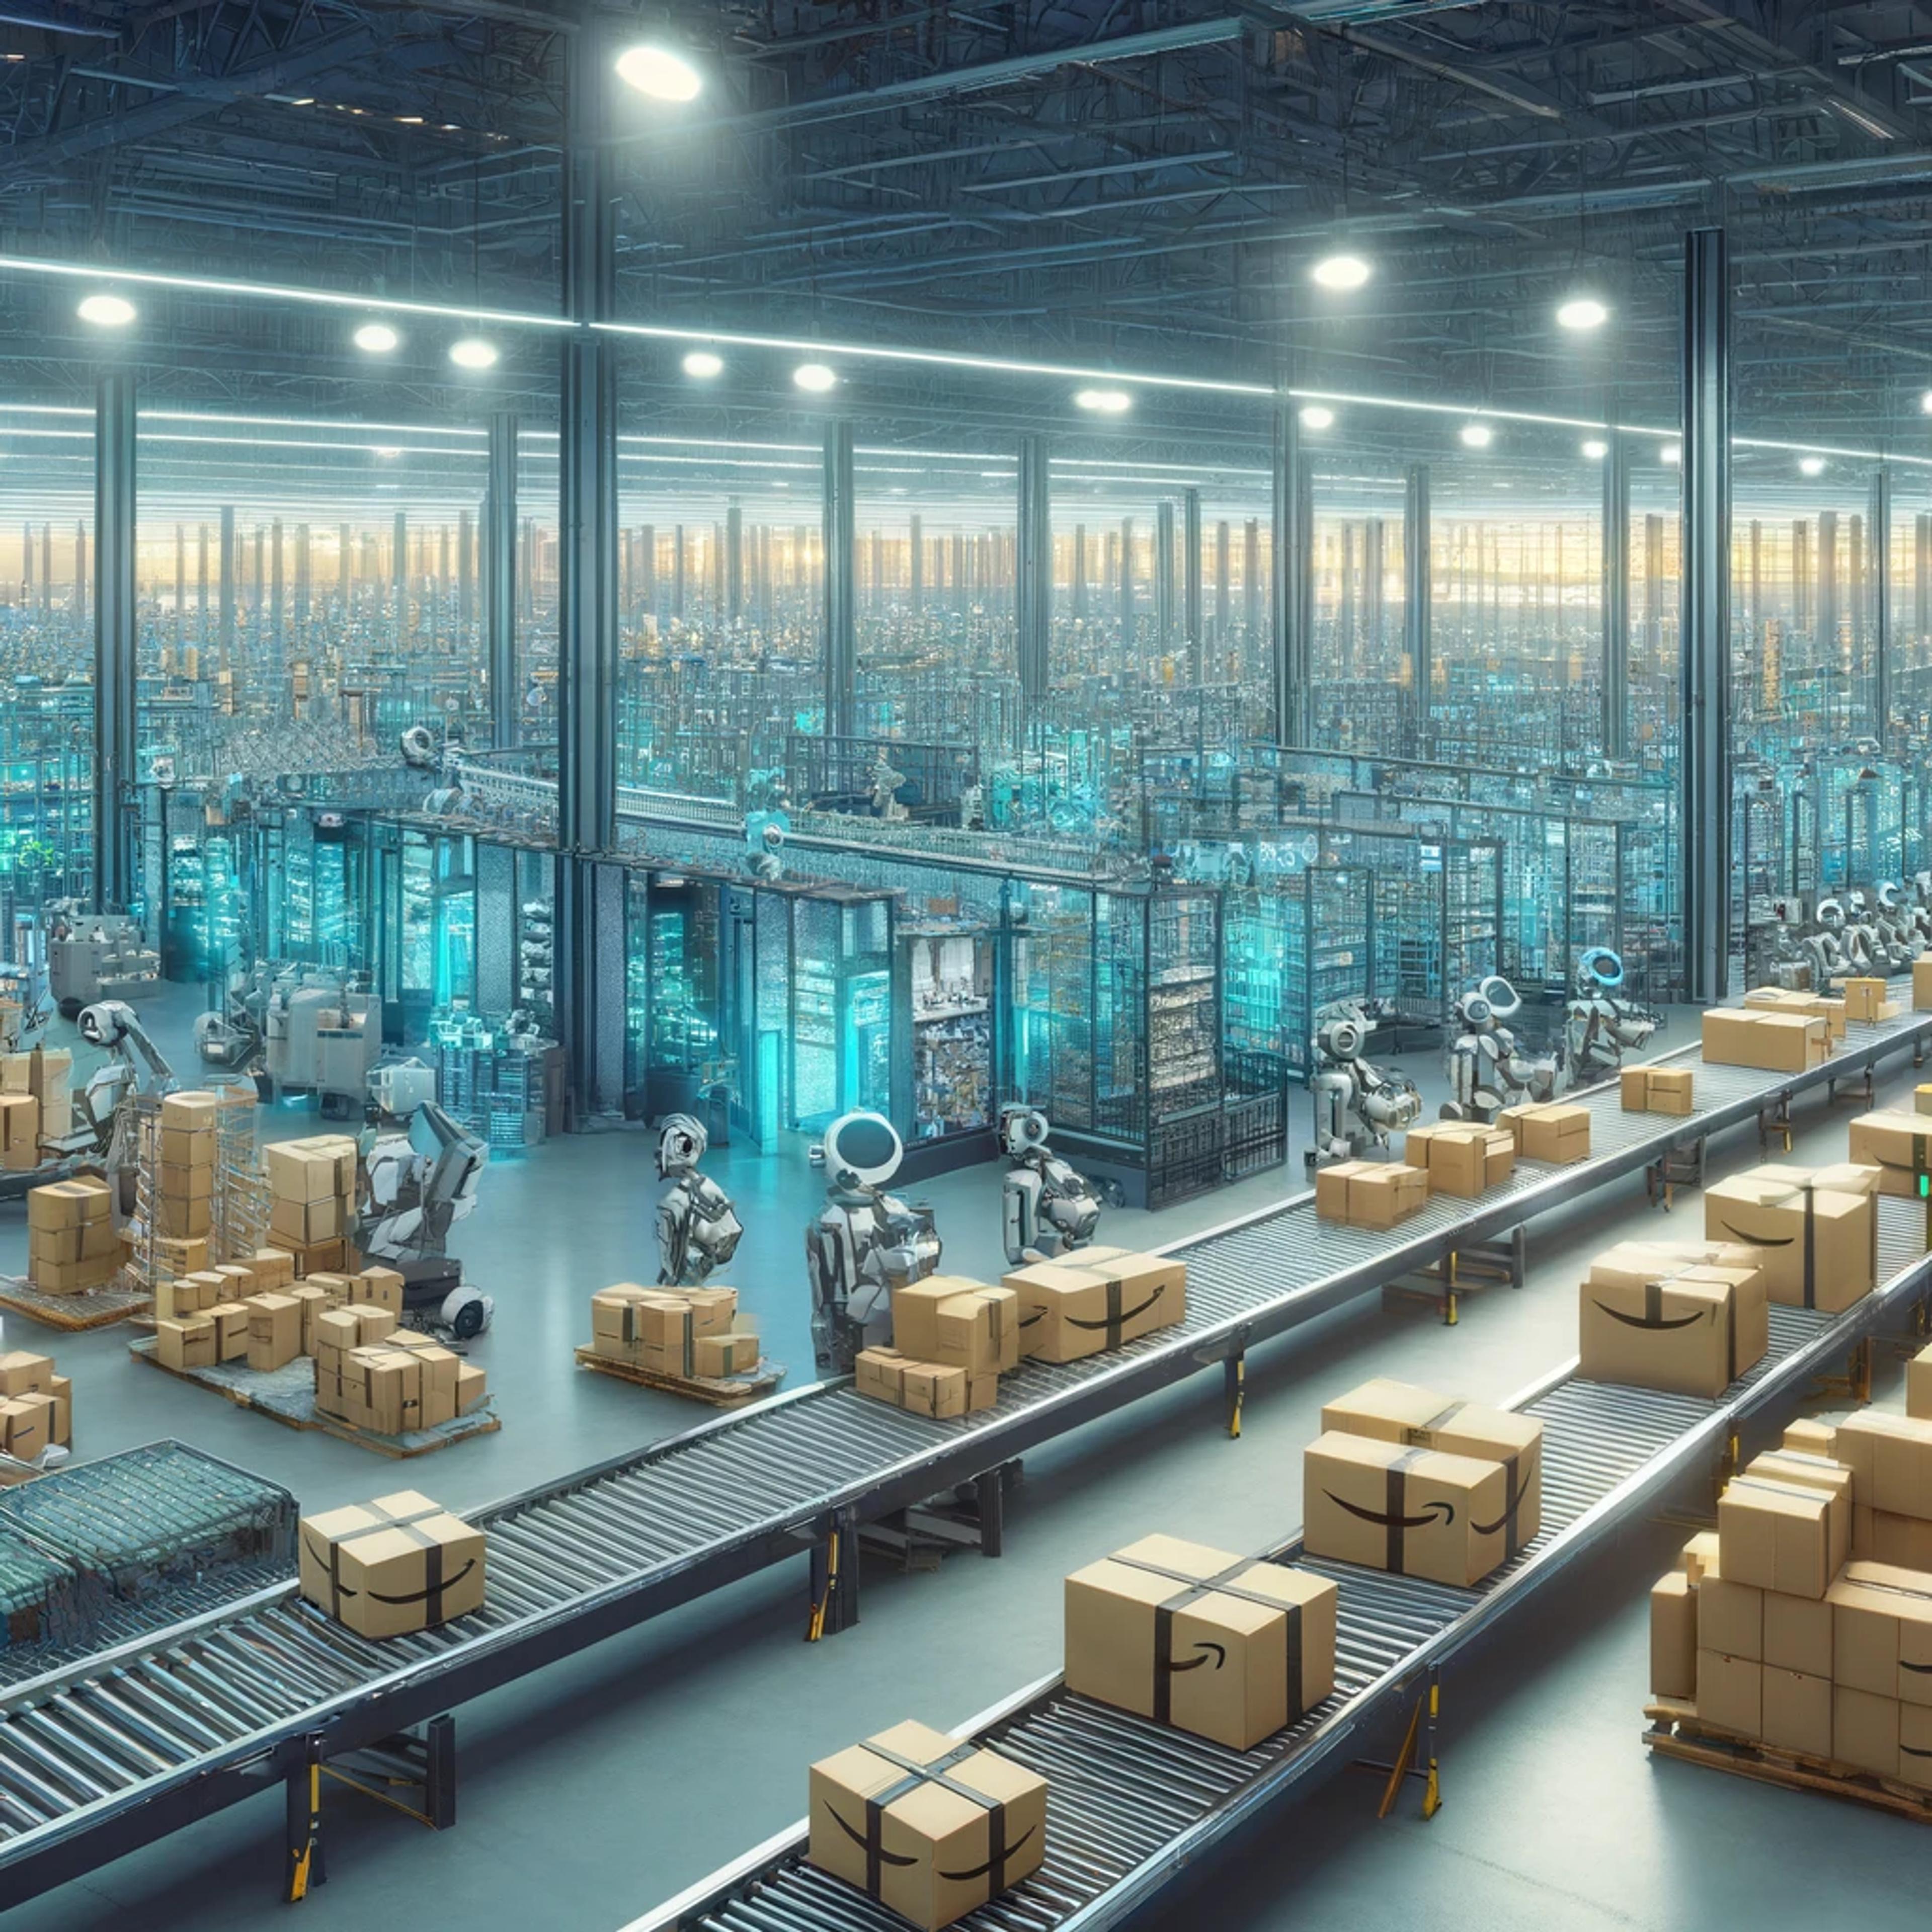  futuristic and bustling Amazon fulfillment center with automated robots.